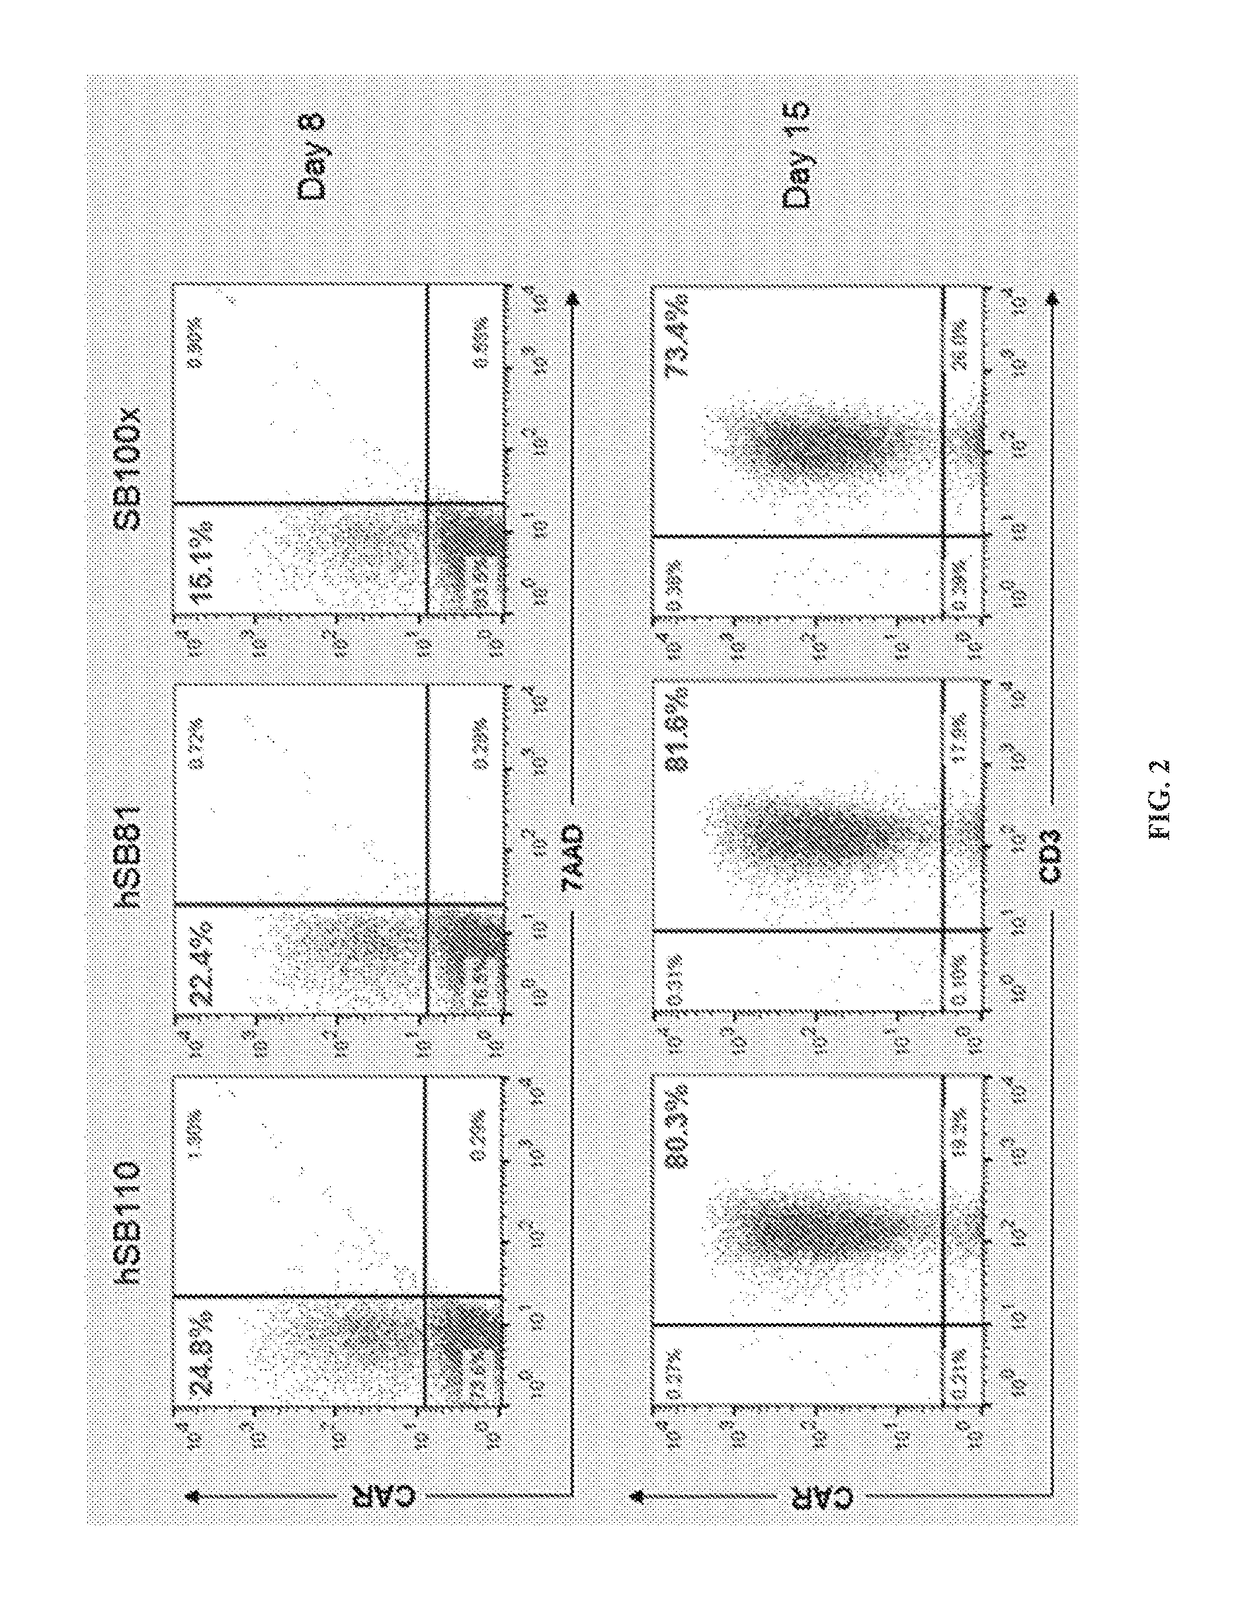 Transposase polypeptides and uses thereof